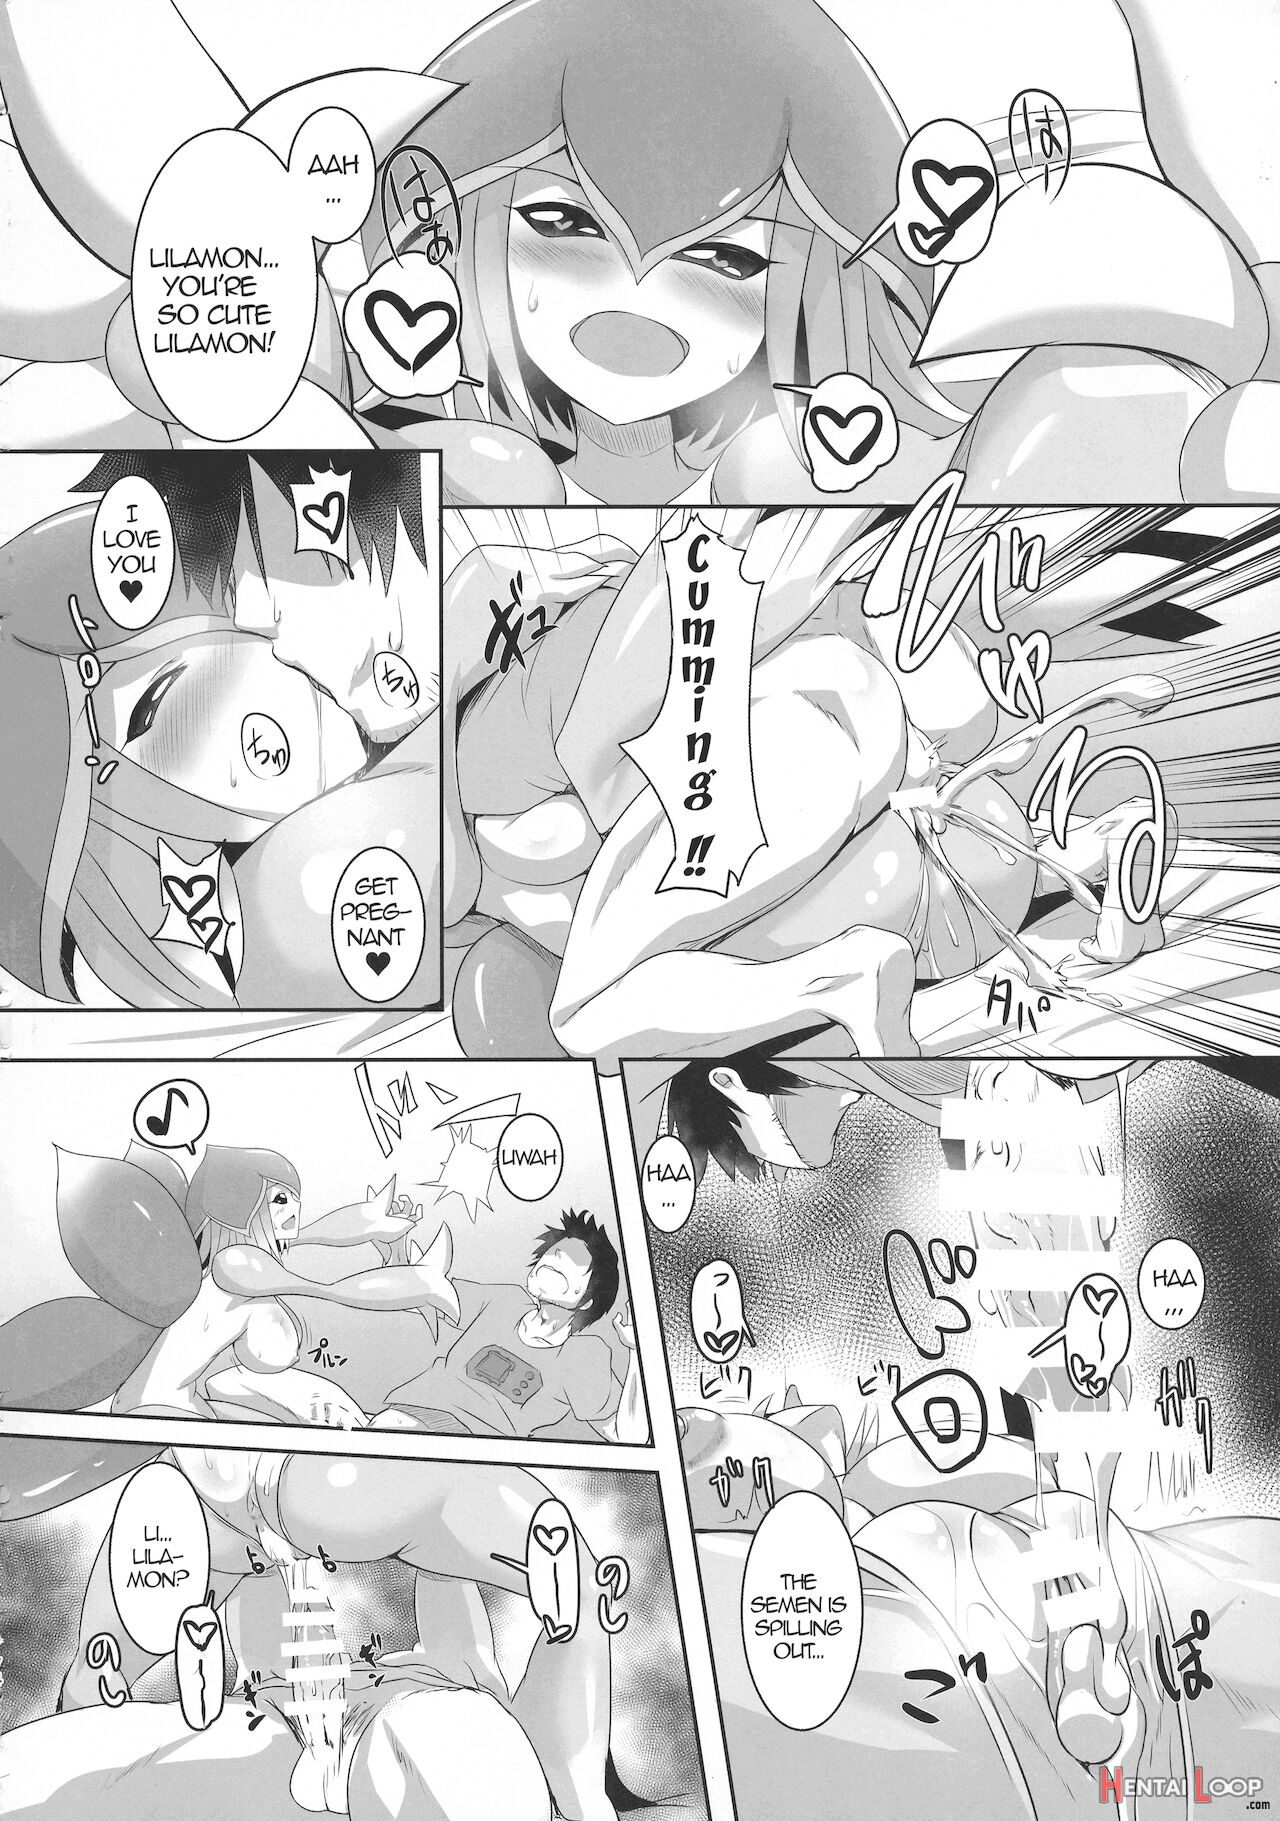 Lovey-dovey Sex Life With Lilamon Evolution! page 8